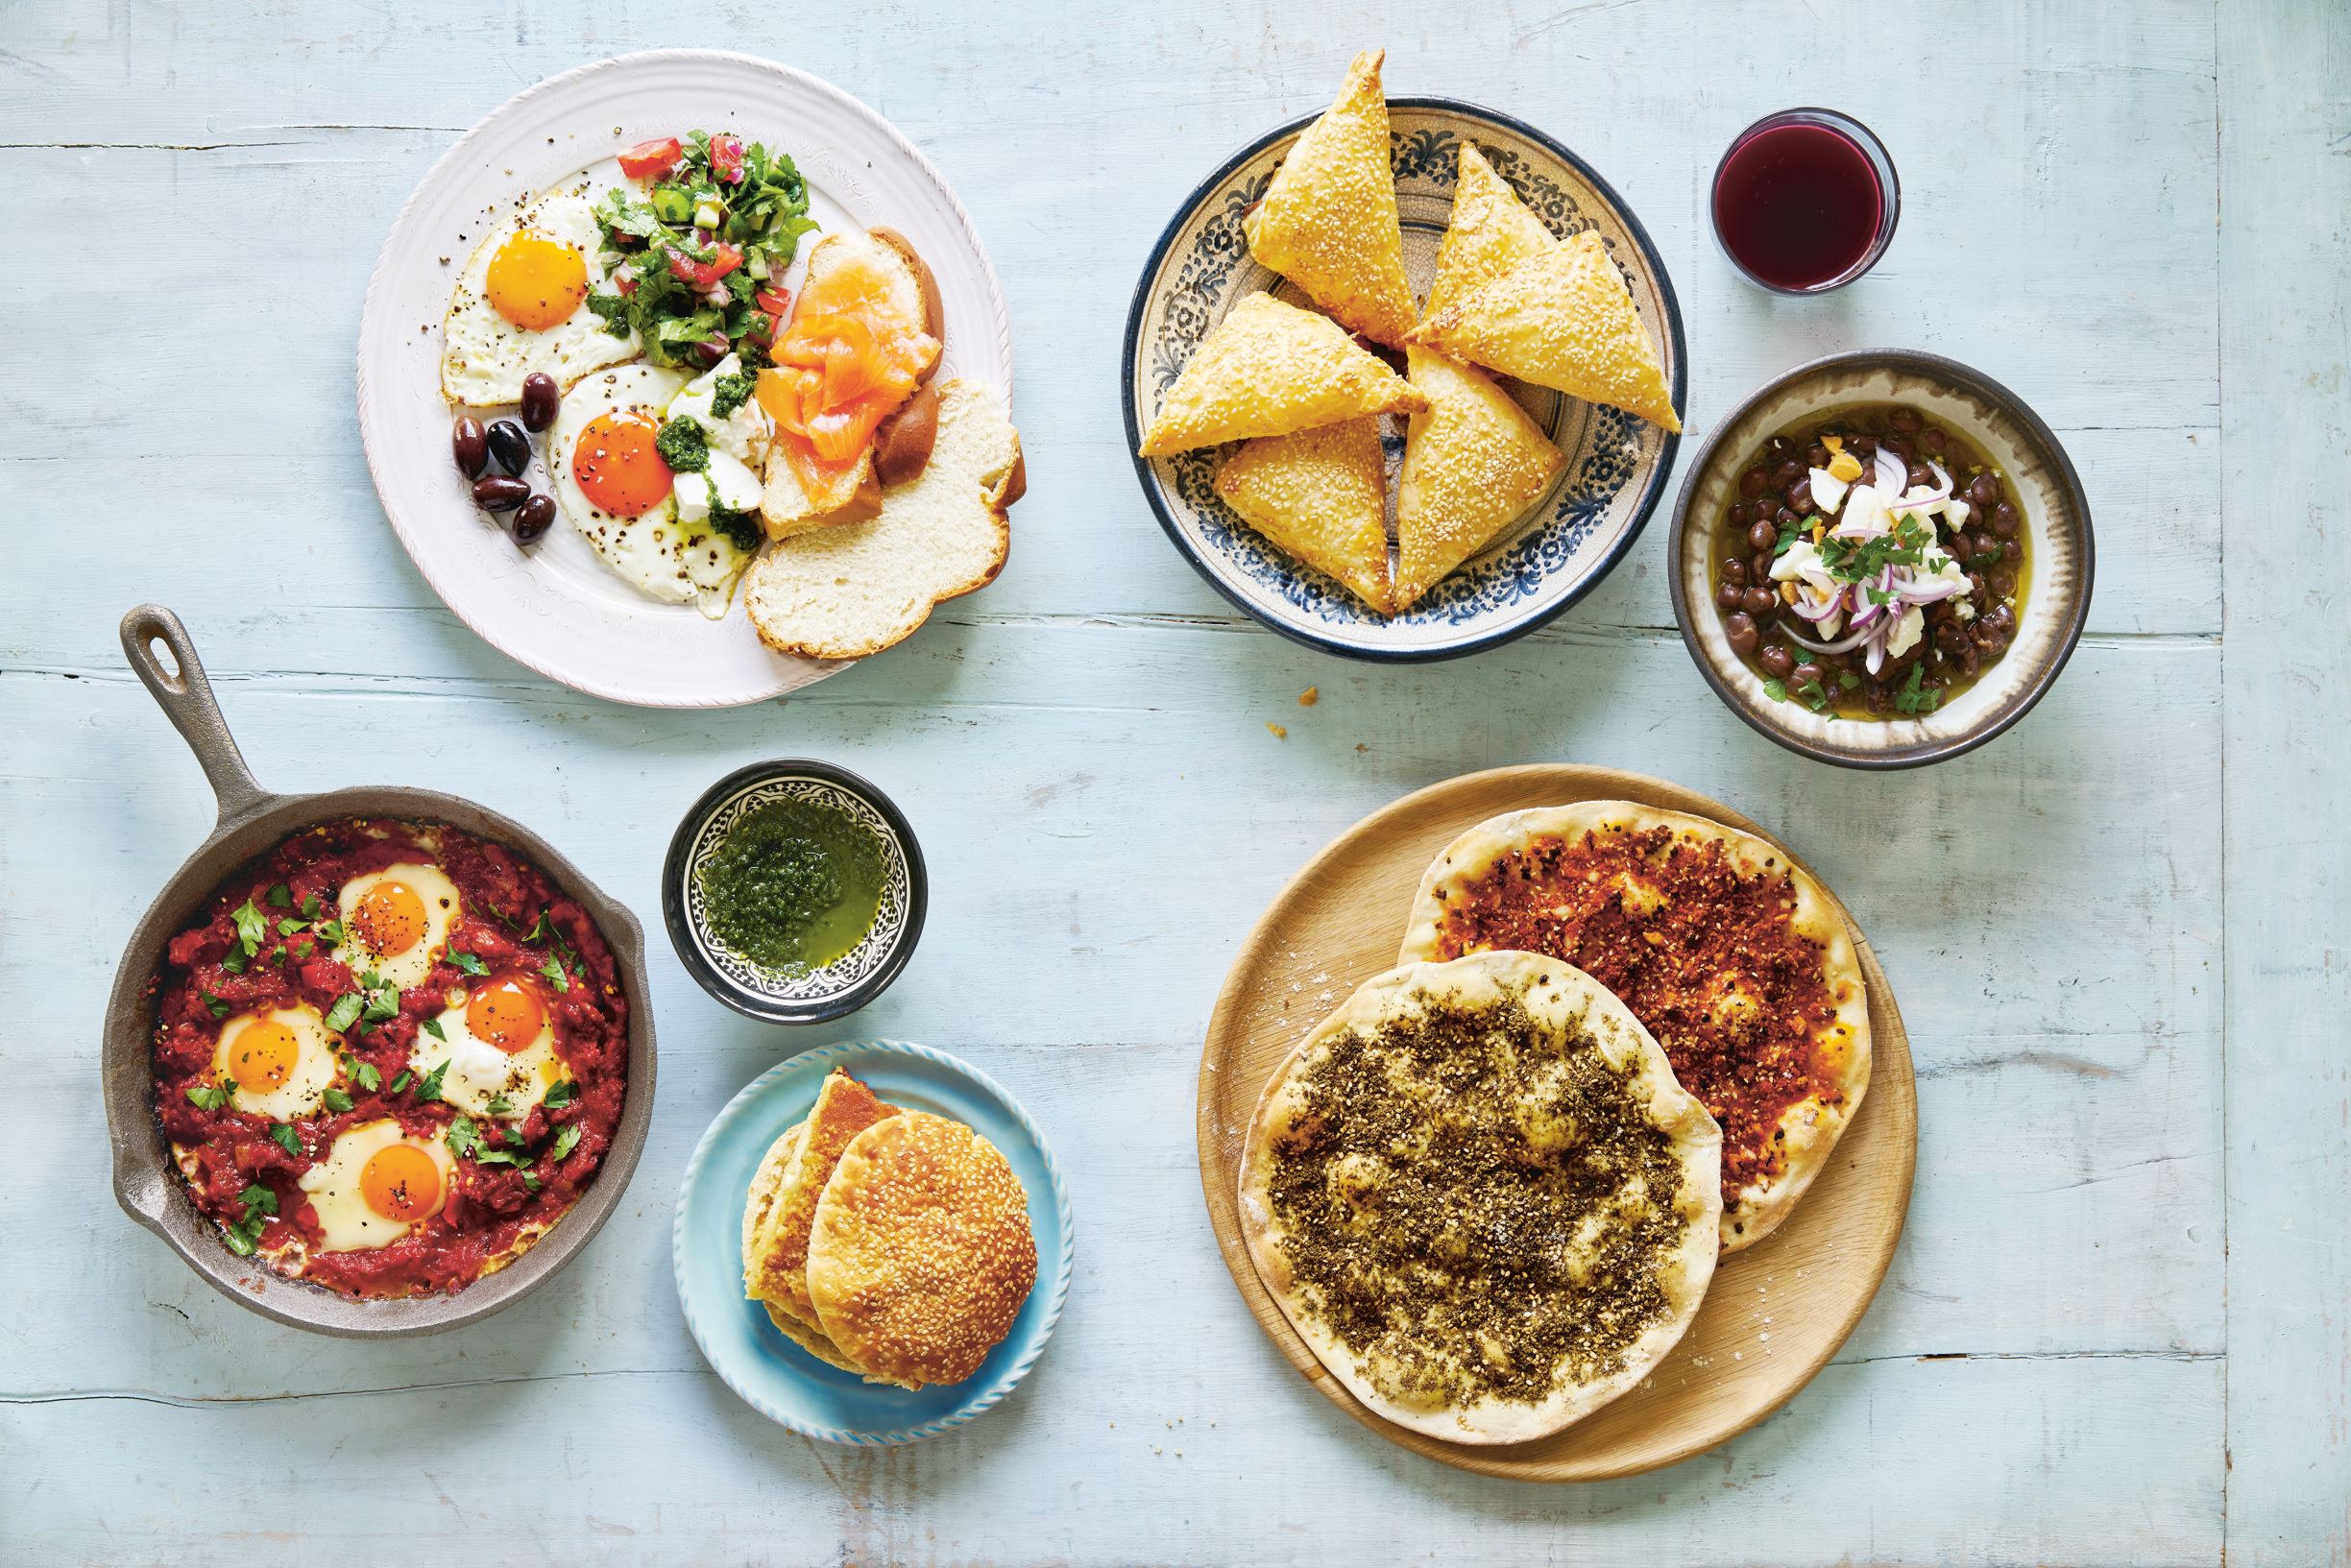 Clockwise from top left: Israeli breakfast plate; cheese-stuffed puff pastry; pomegranate juice; Egyptian fava bean stew; flatbreads with za'atar and keshek; knafeh sandwich with kataifi crust; Israeli shakshuka, as reproduced in Breakfast: The Cookbook